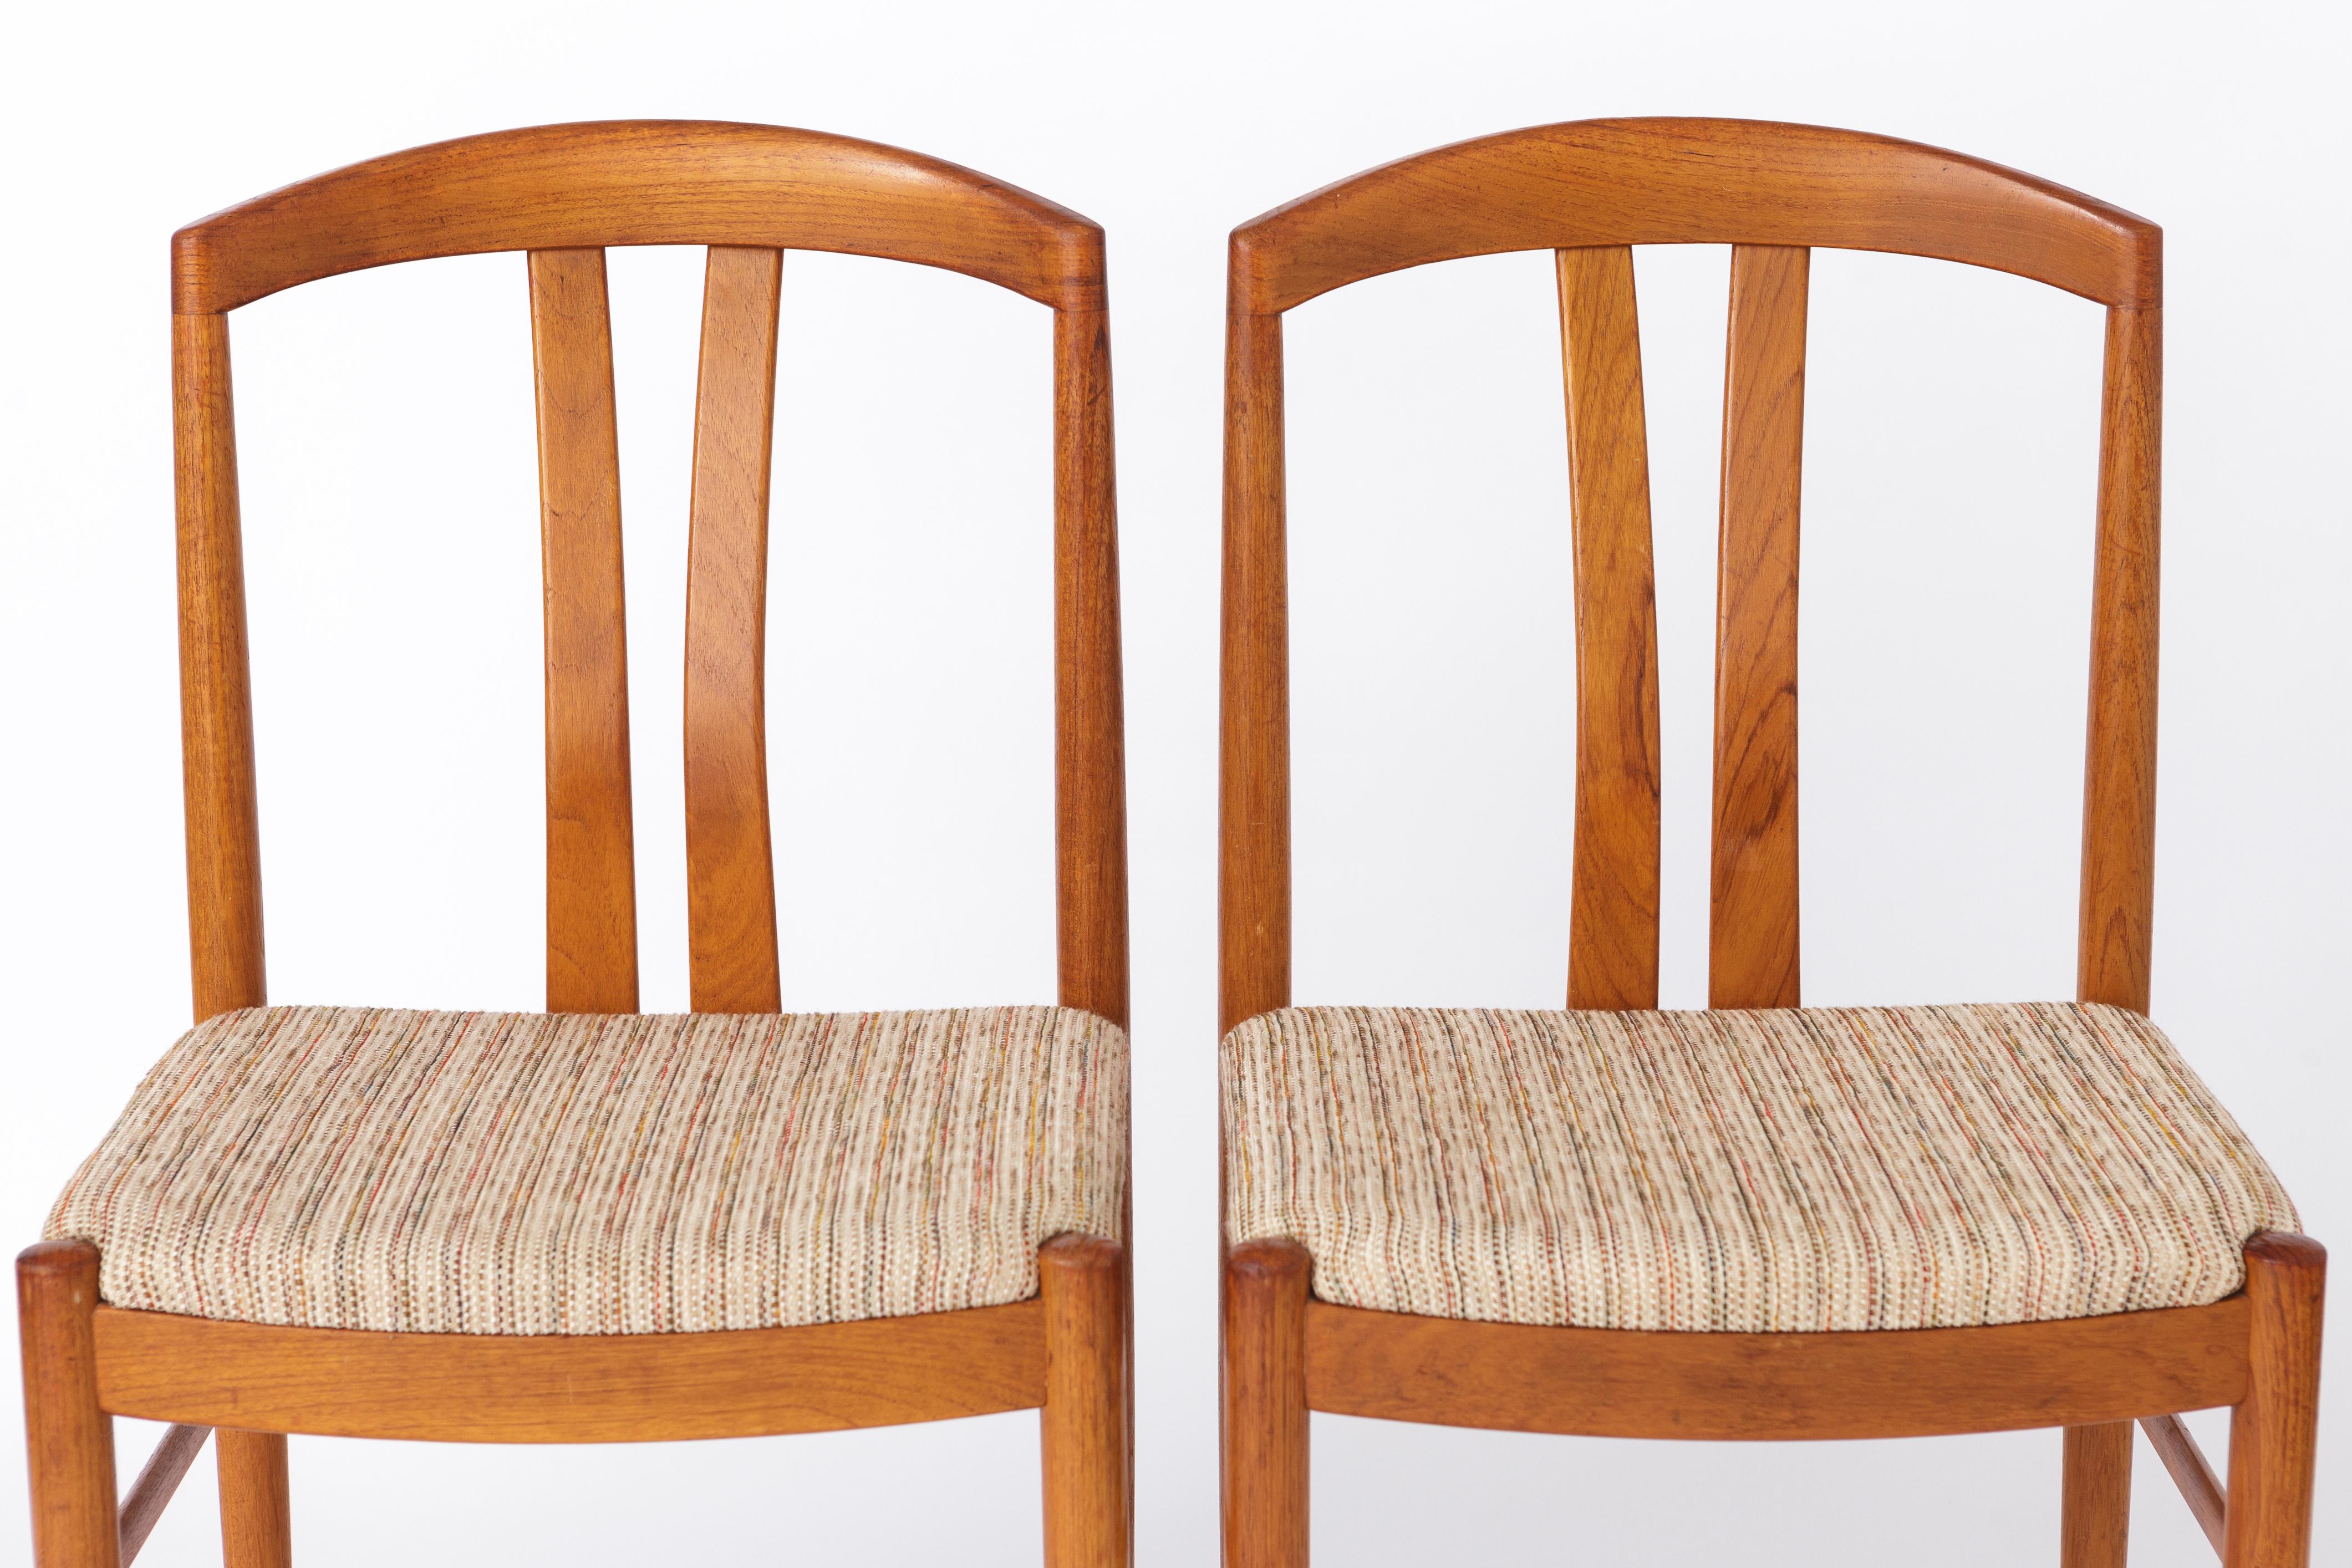 Pair of midcentury chairs made by Johansson & Söner, Sweden. 
Design by Carl Ekström in the 1960s. 
Displayed price is for a pair. Totally up to 6 available. 

Good vintage condition. Sturdy teak frames. Original textile upholstery. 
The corners of